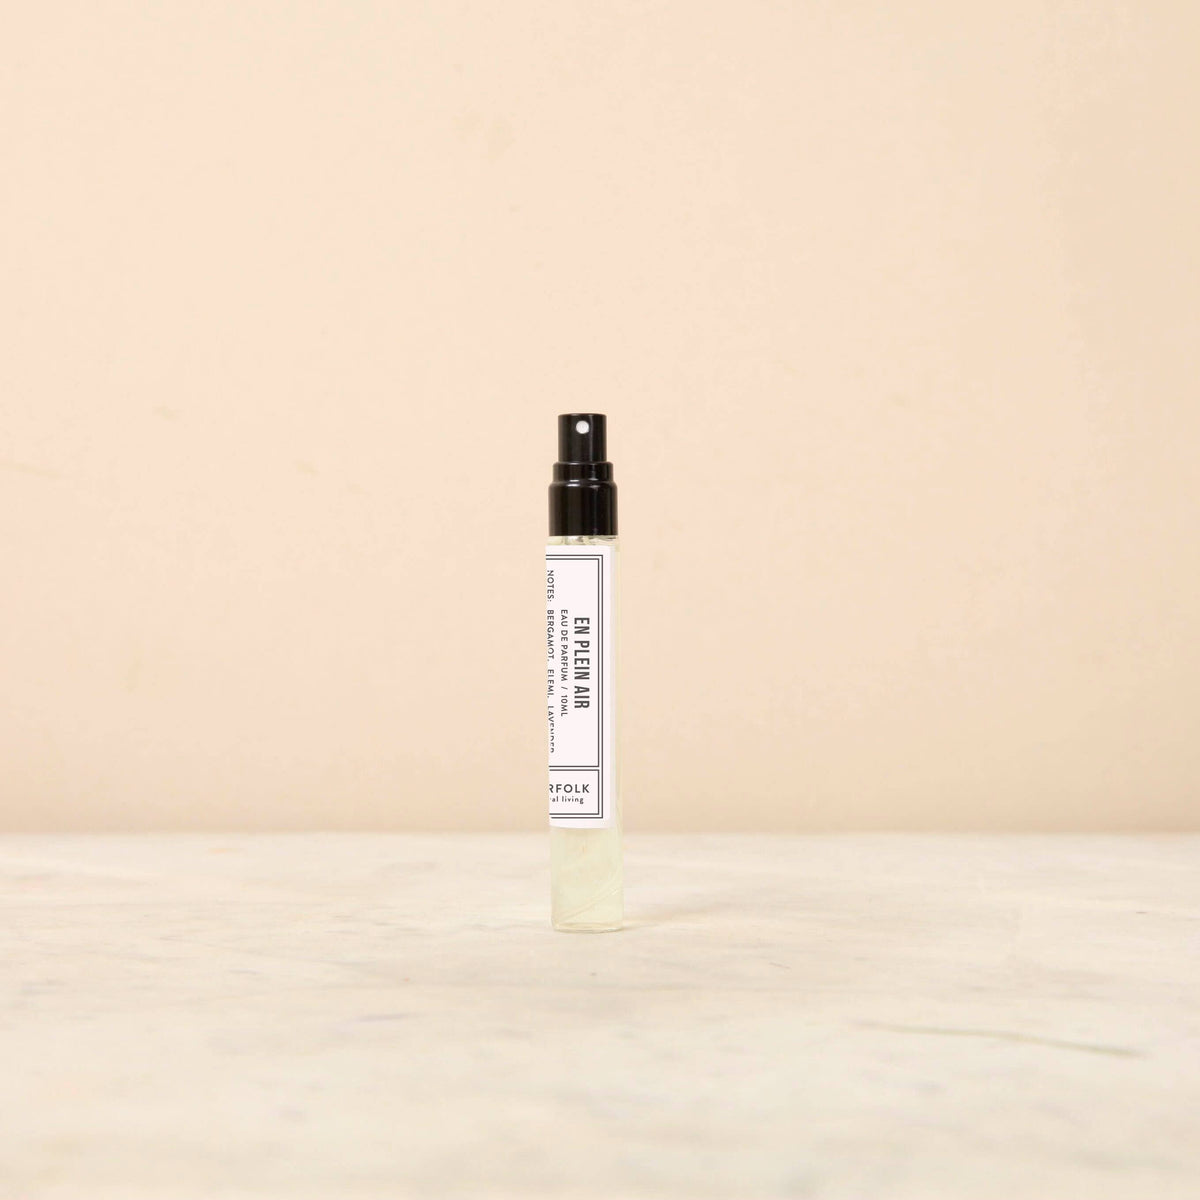 A small spray bottle with a black nozzle and cap stands on a light-colored surface against a beige background. The bottle has a white label with text and a minimalistic design, hinting at the clear liquid inside, which is infused with delicate floral essences. This product is the Norfolk Natural Living Parfum - En Plein Air 10ml by Norfolk Natural Living.